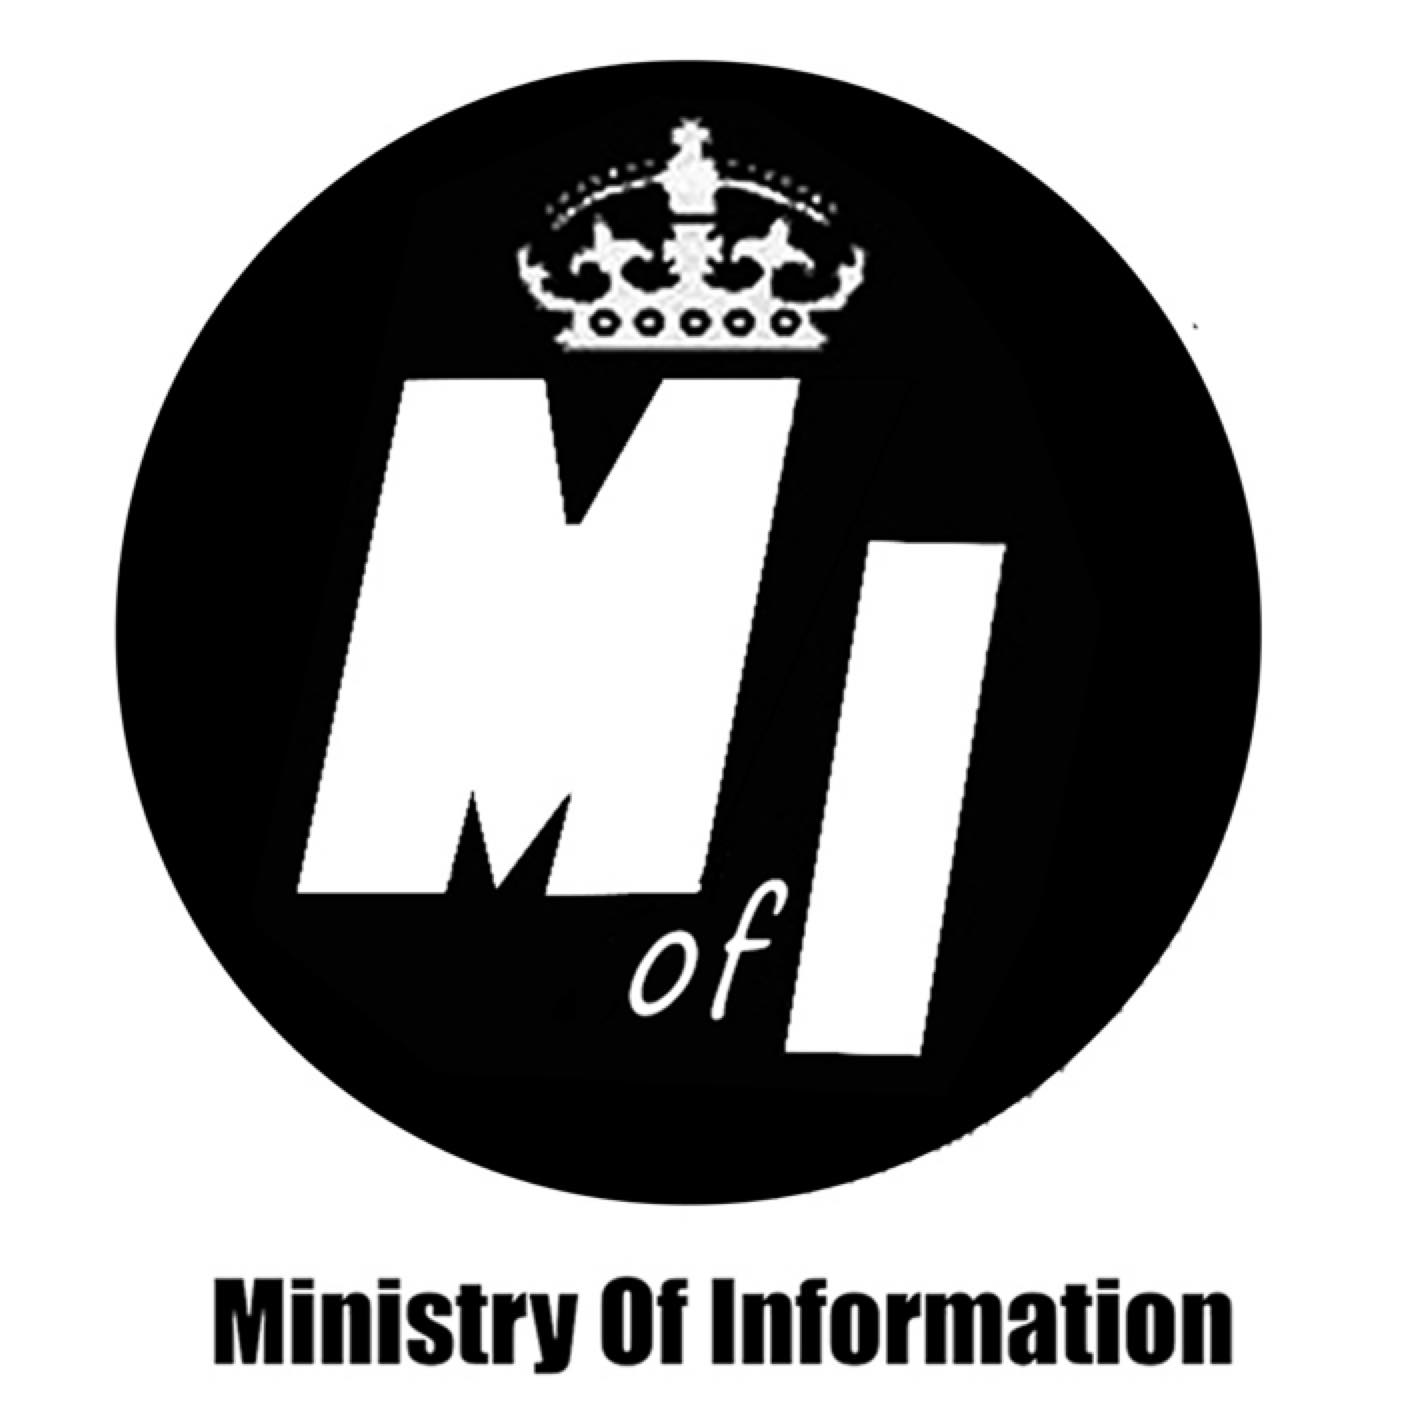 Ministry of Information logo